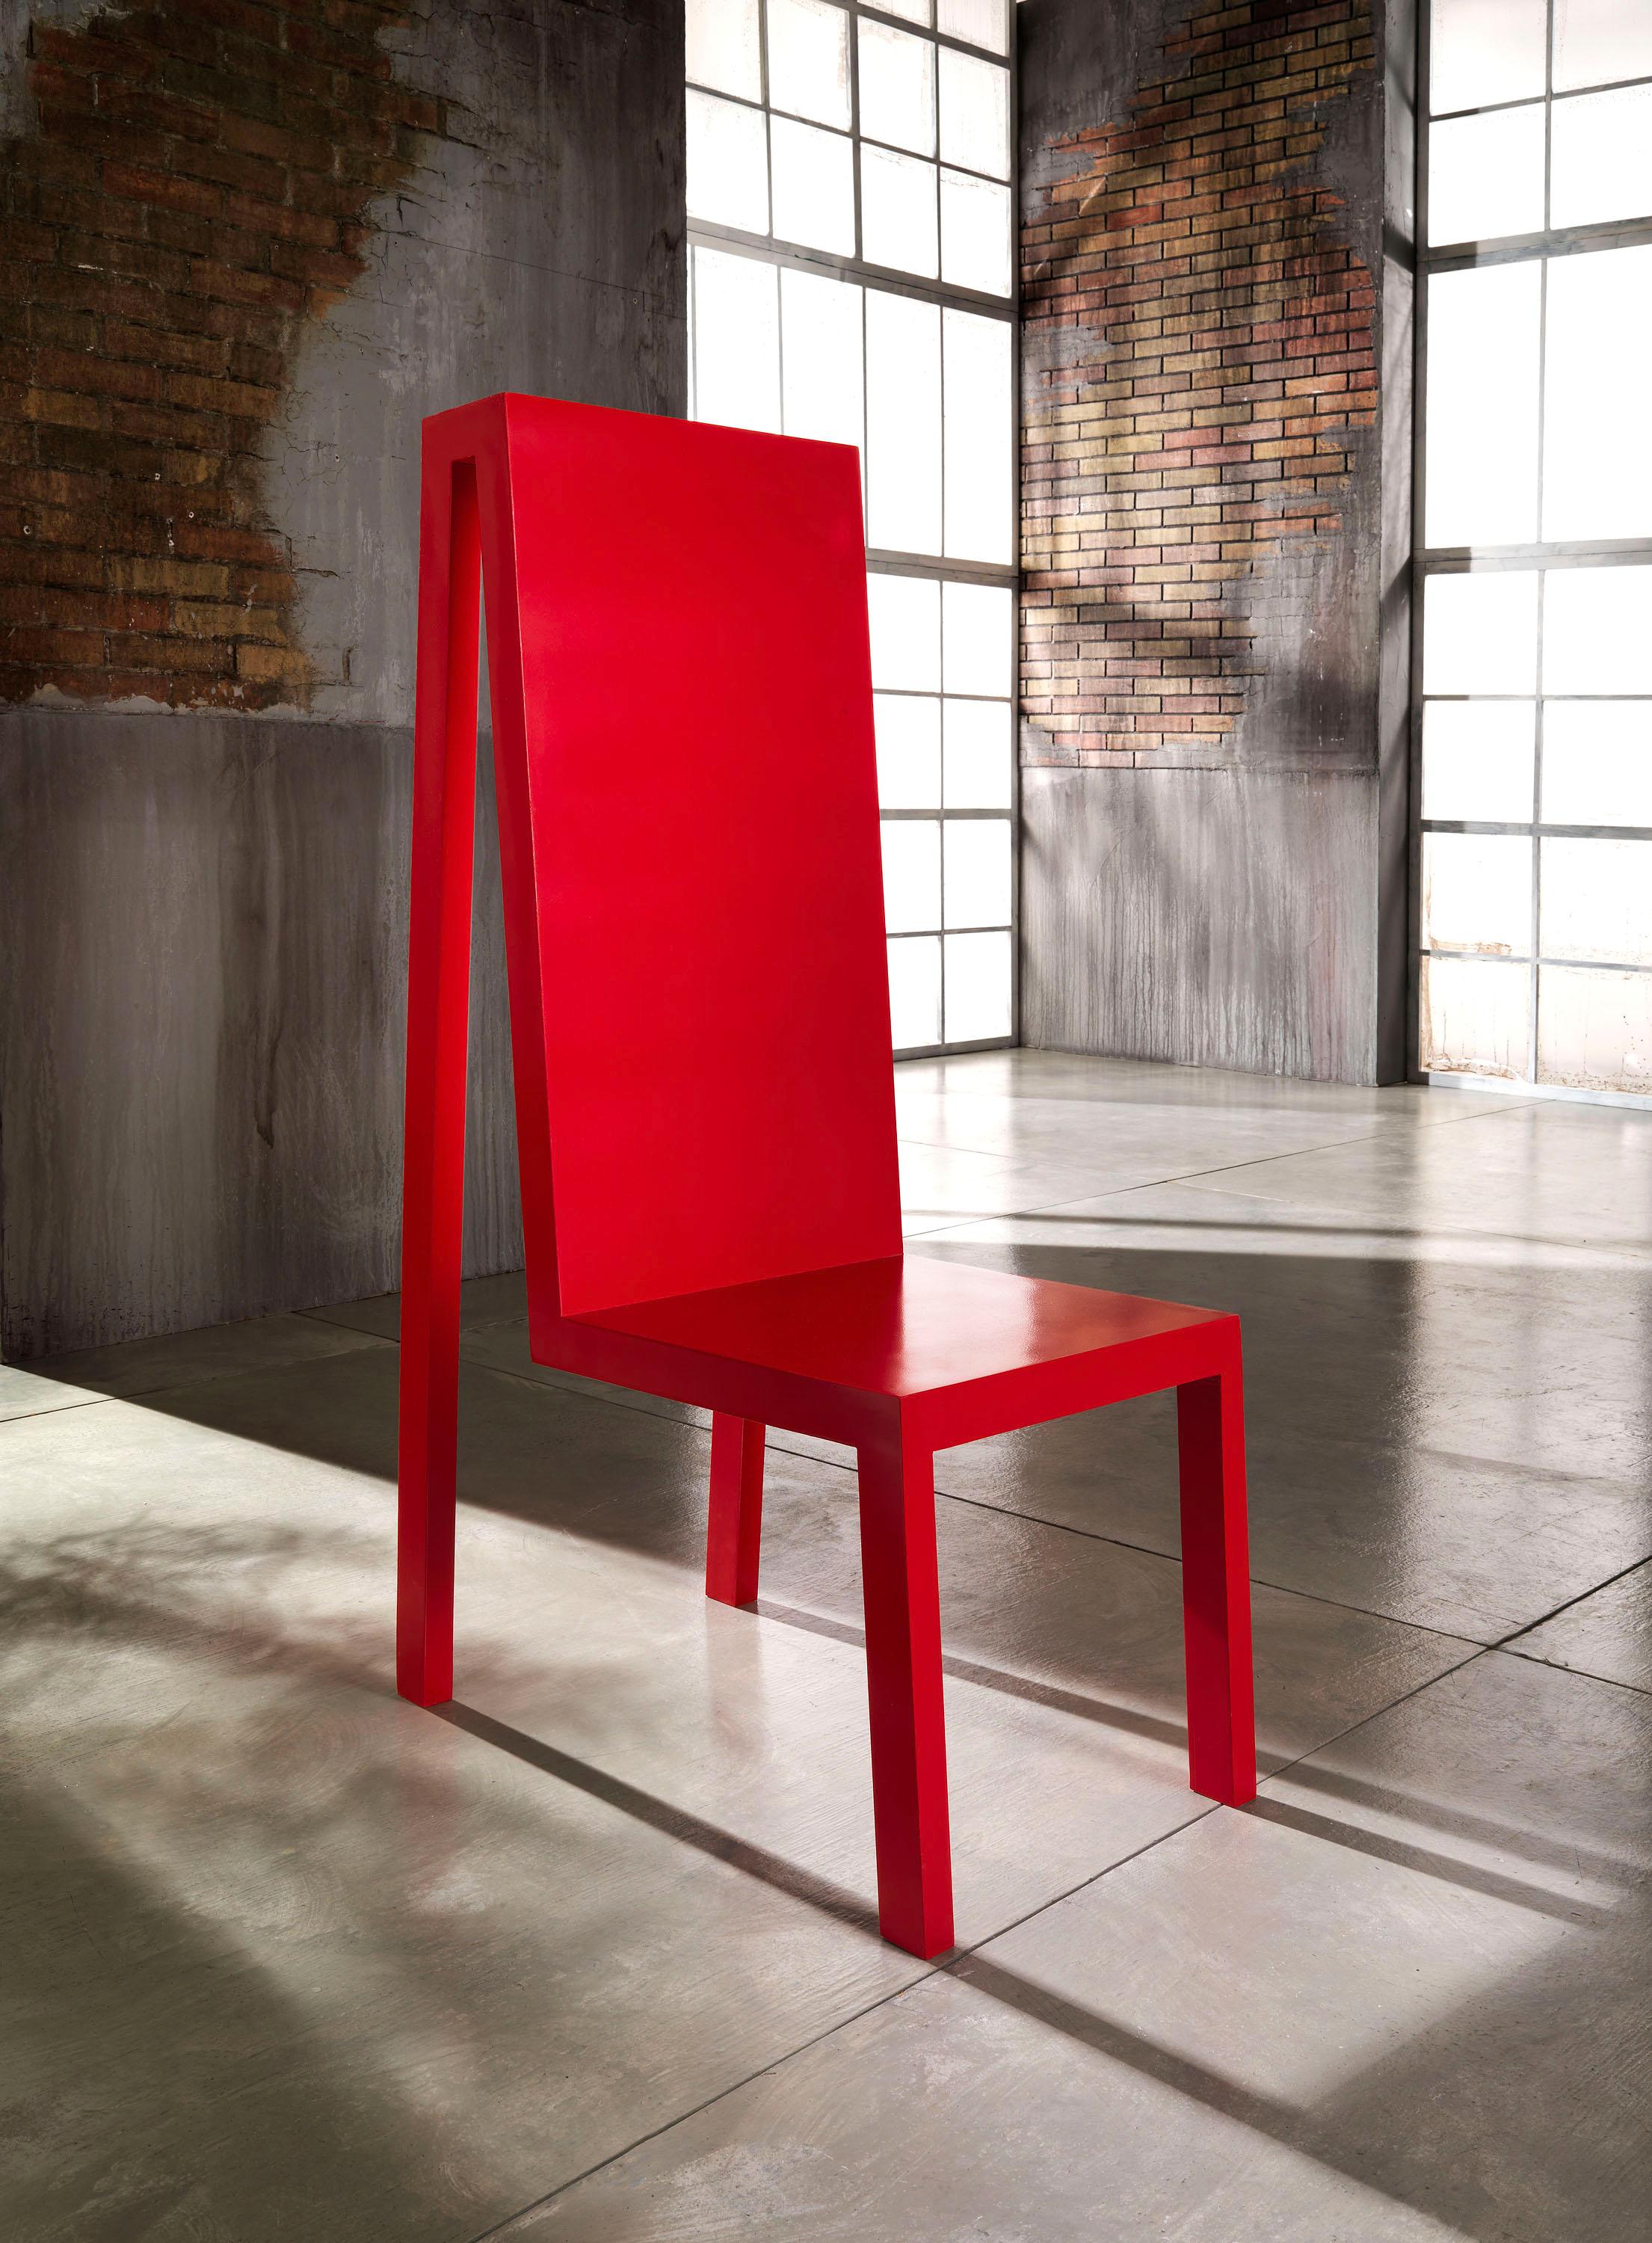 Exercice Rouge Chair by Francesco Profili
Dimensions: W 70 x D 45x H 127 cm 
Materials: Iron, Wood.

Form and color are combined in an unique design vision.
An involved artisanal production method, which avoids the use of junctures, realises a chair